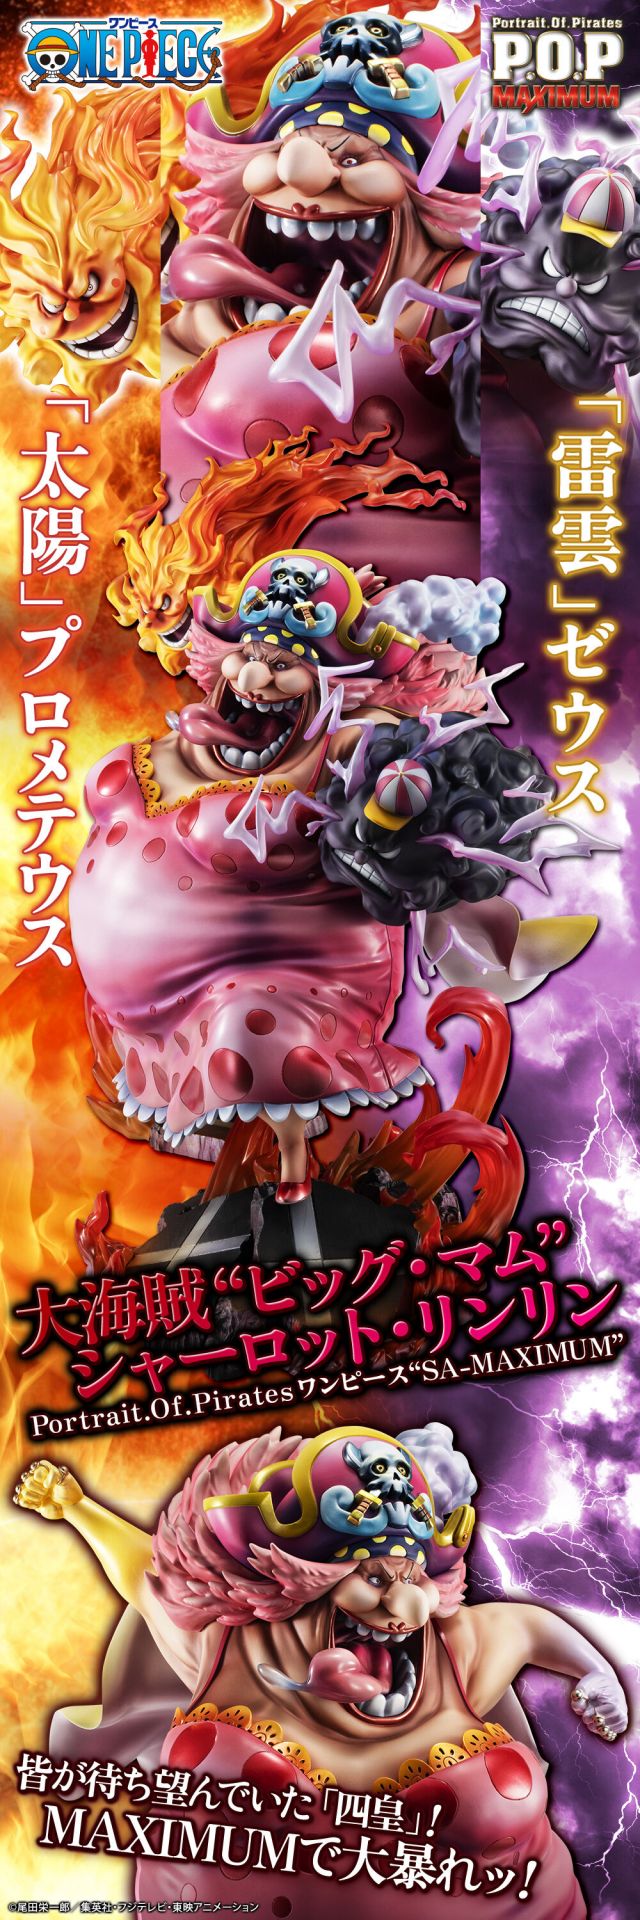 PREORDER Portrait.Of.Pirates ONE PIECE“SA-MAXIMUM” Great Pirate “Big Mom”Charlotte Linlin